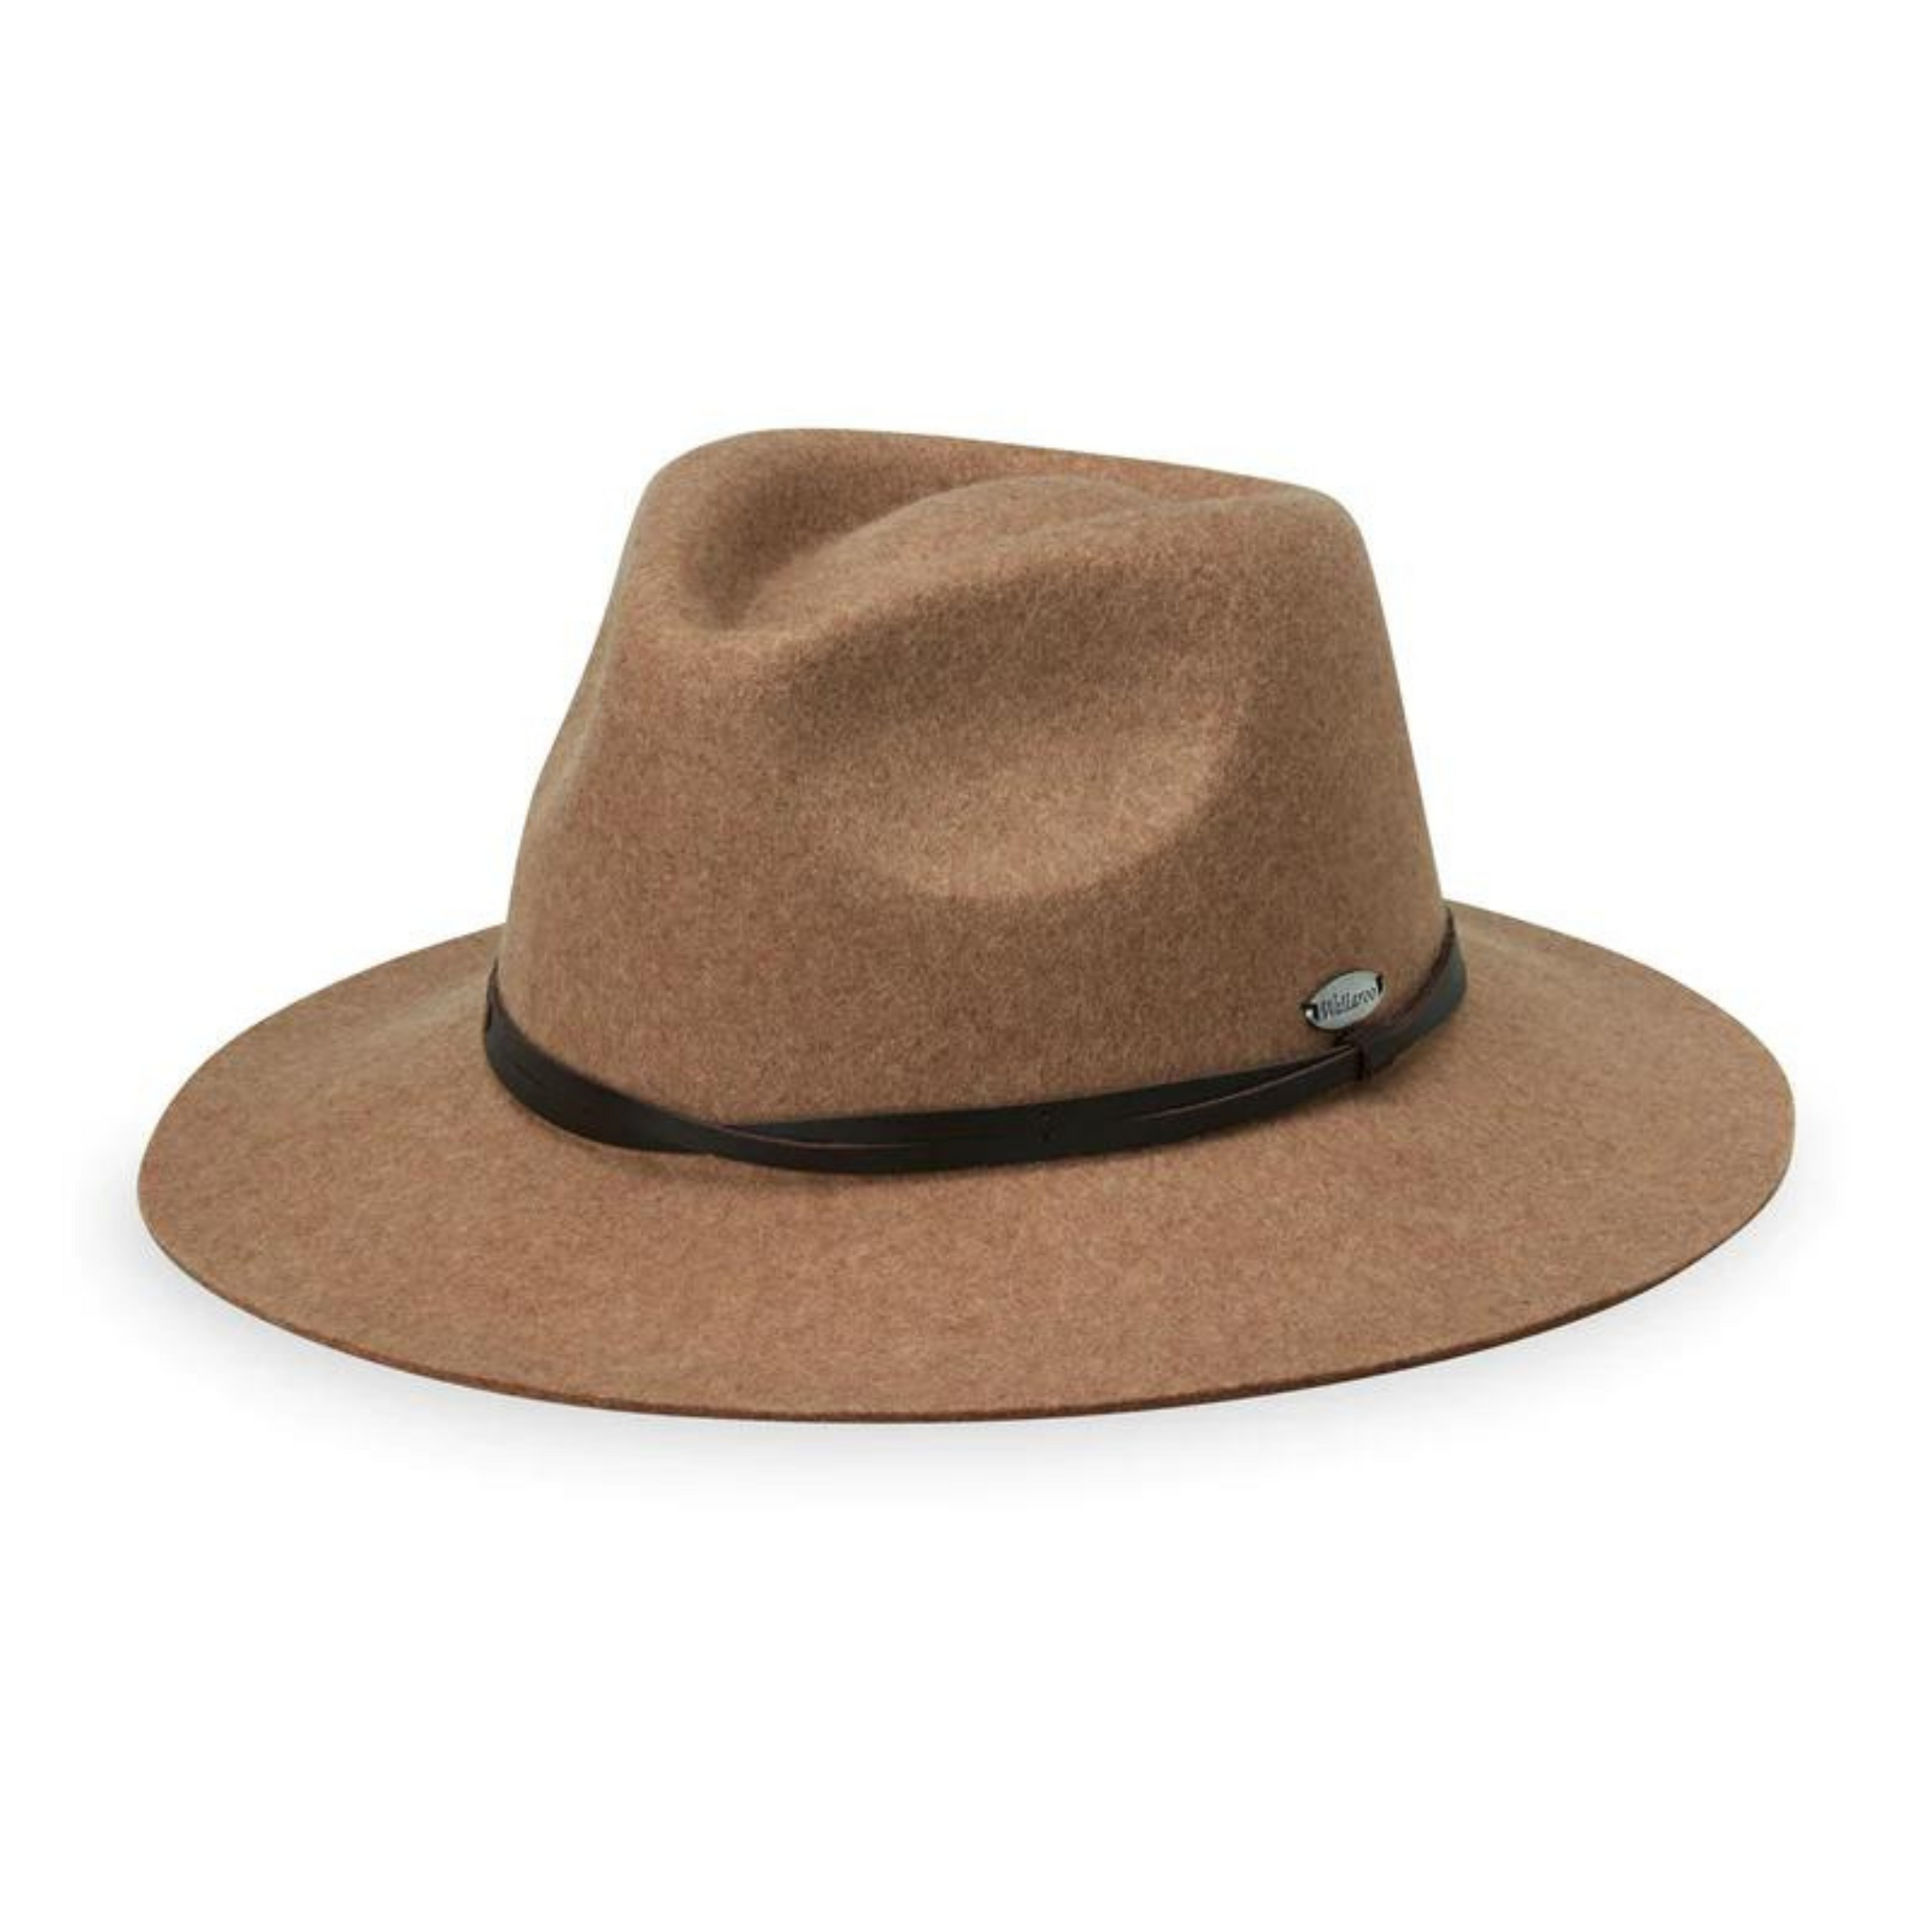 A front view of a light brown felted fedora with a black band.